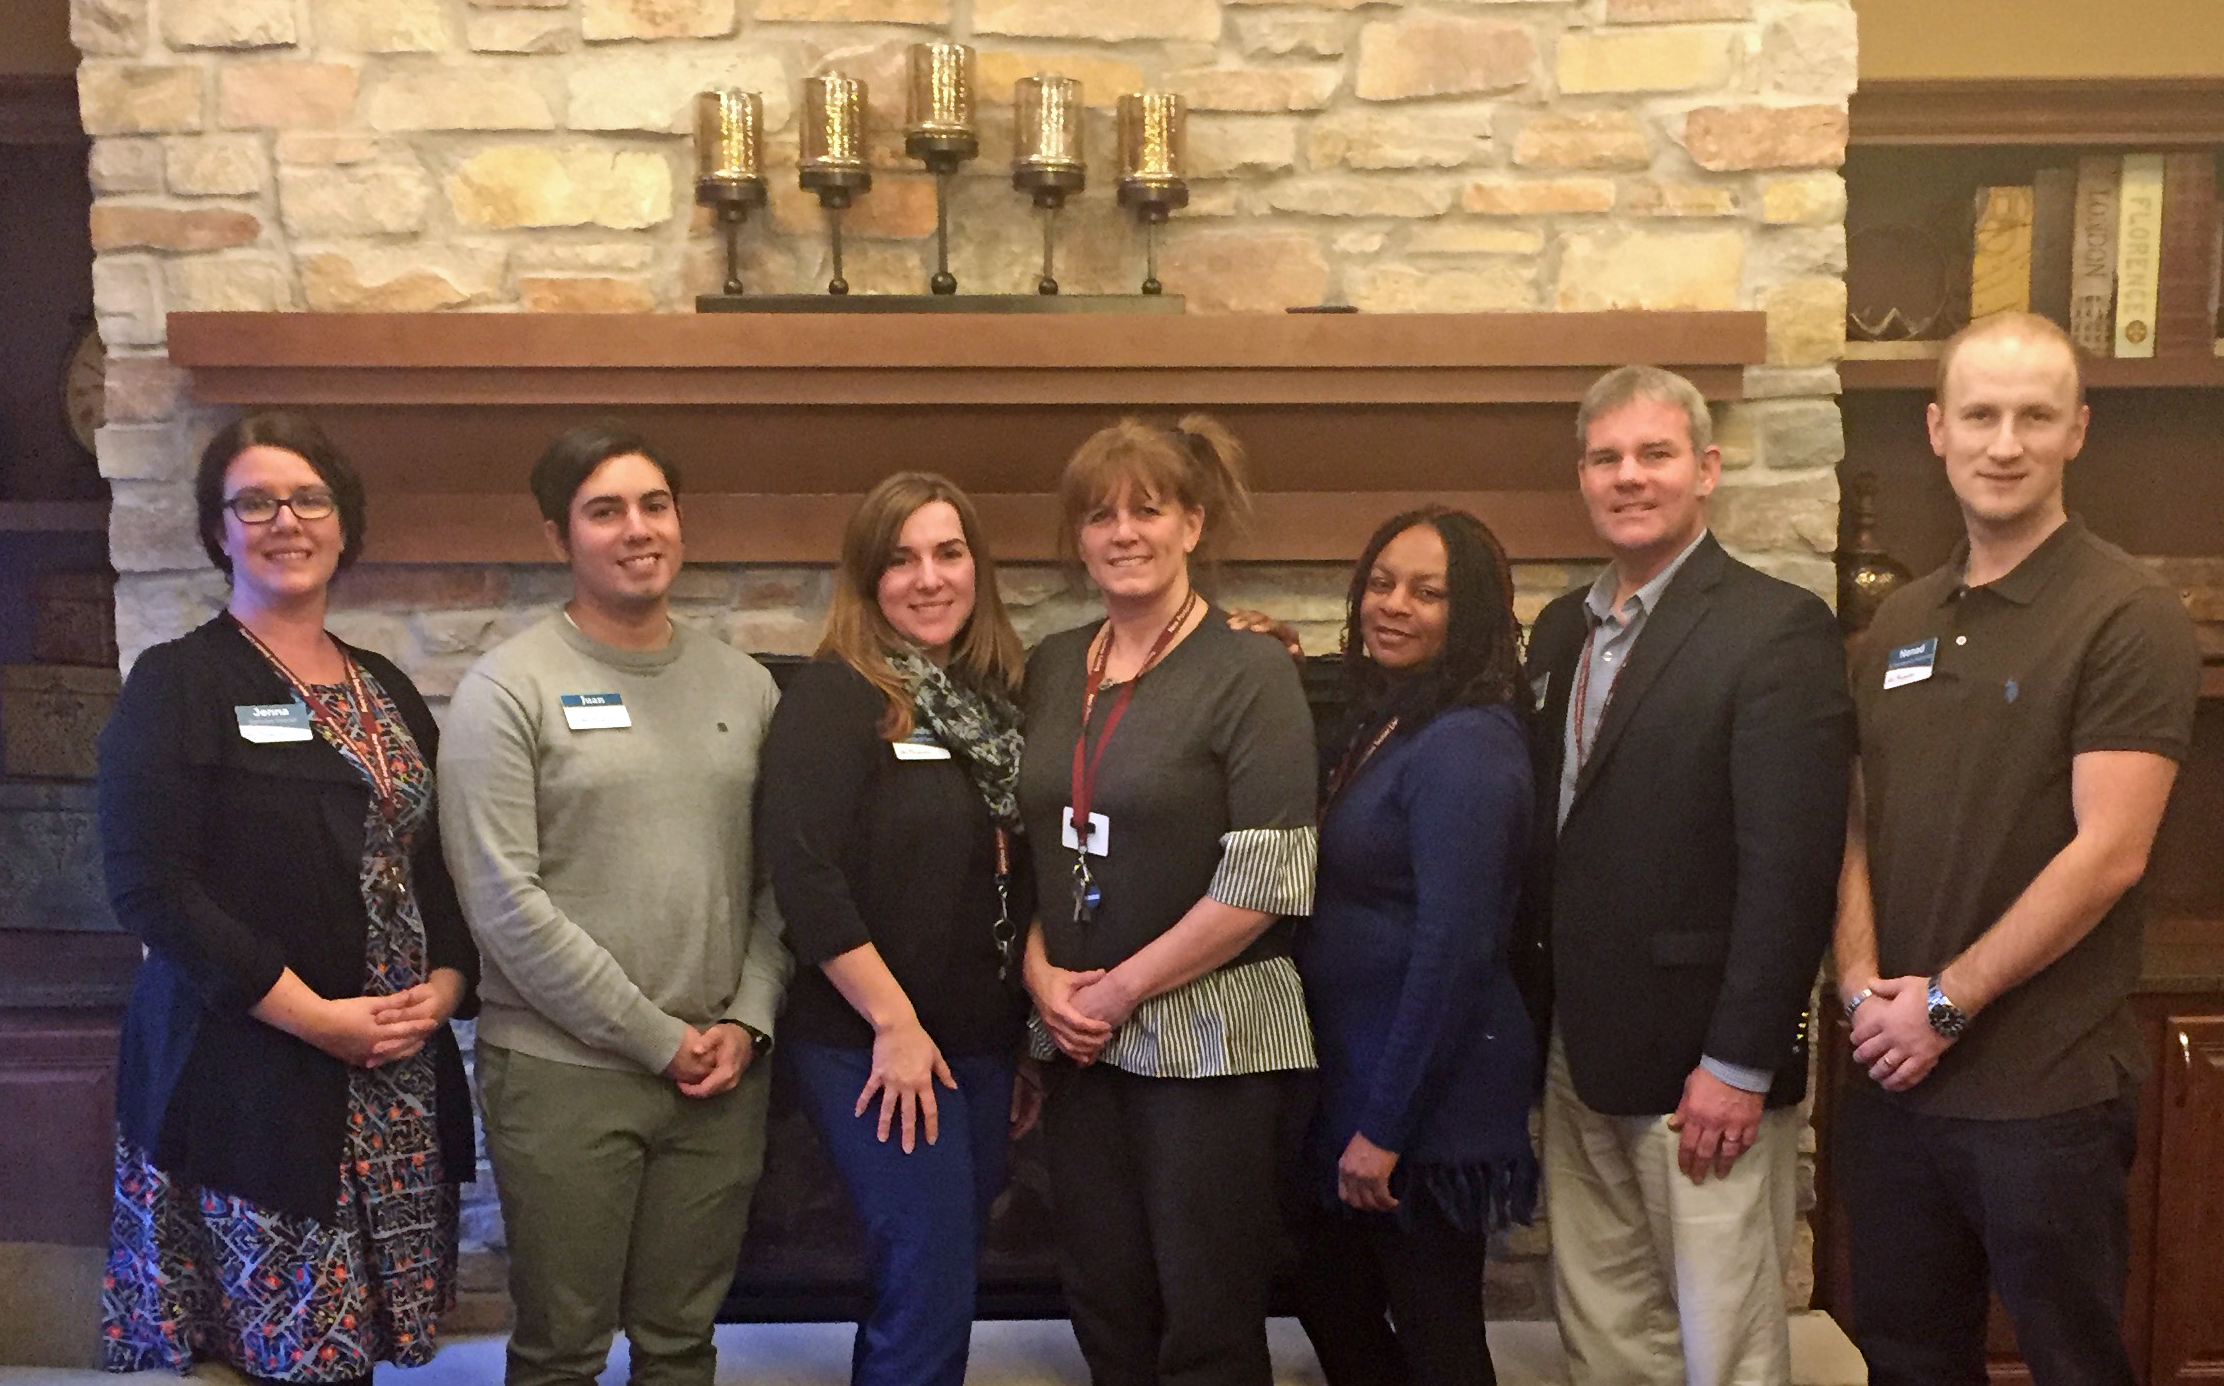 New Perspective-North Shore, Brown Deer, Wis., along with its staff, was one of four New Perspective Senior Living communities to be awarded "2018 Best of Senior Living."